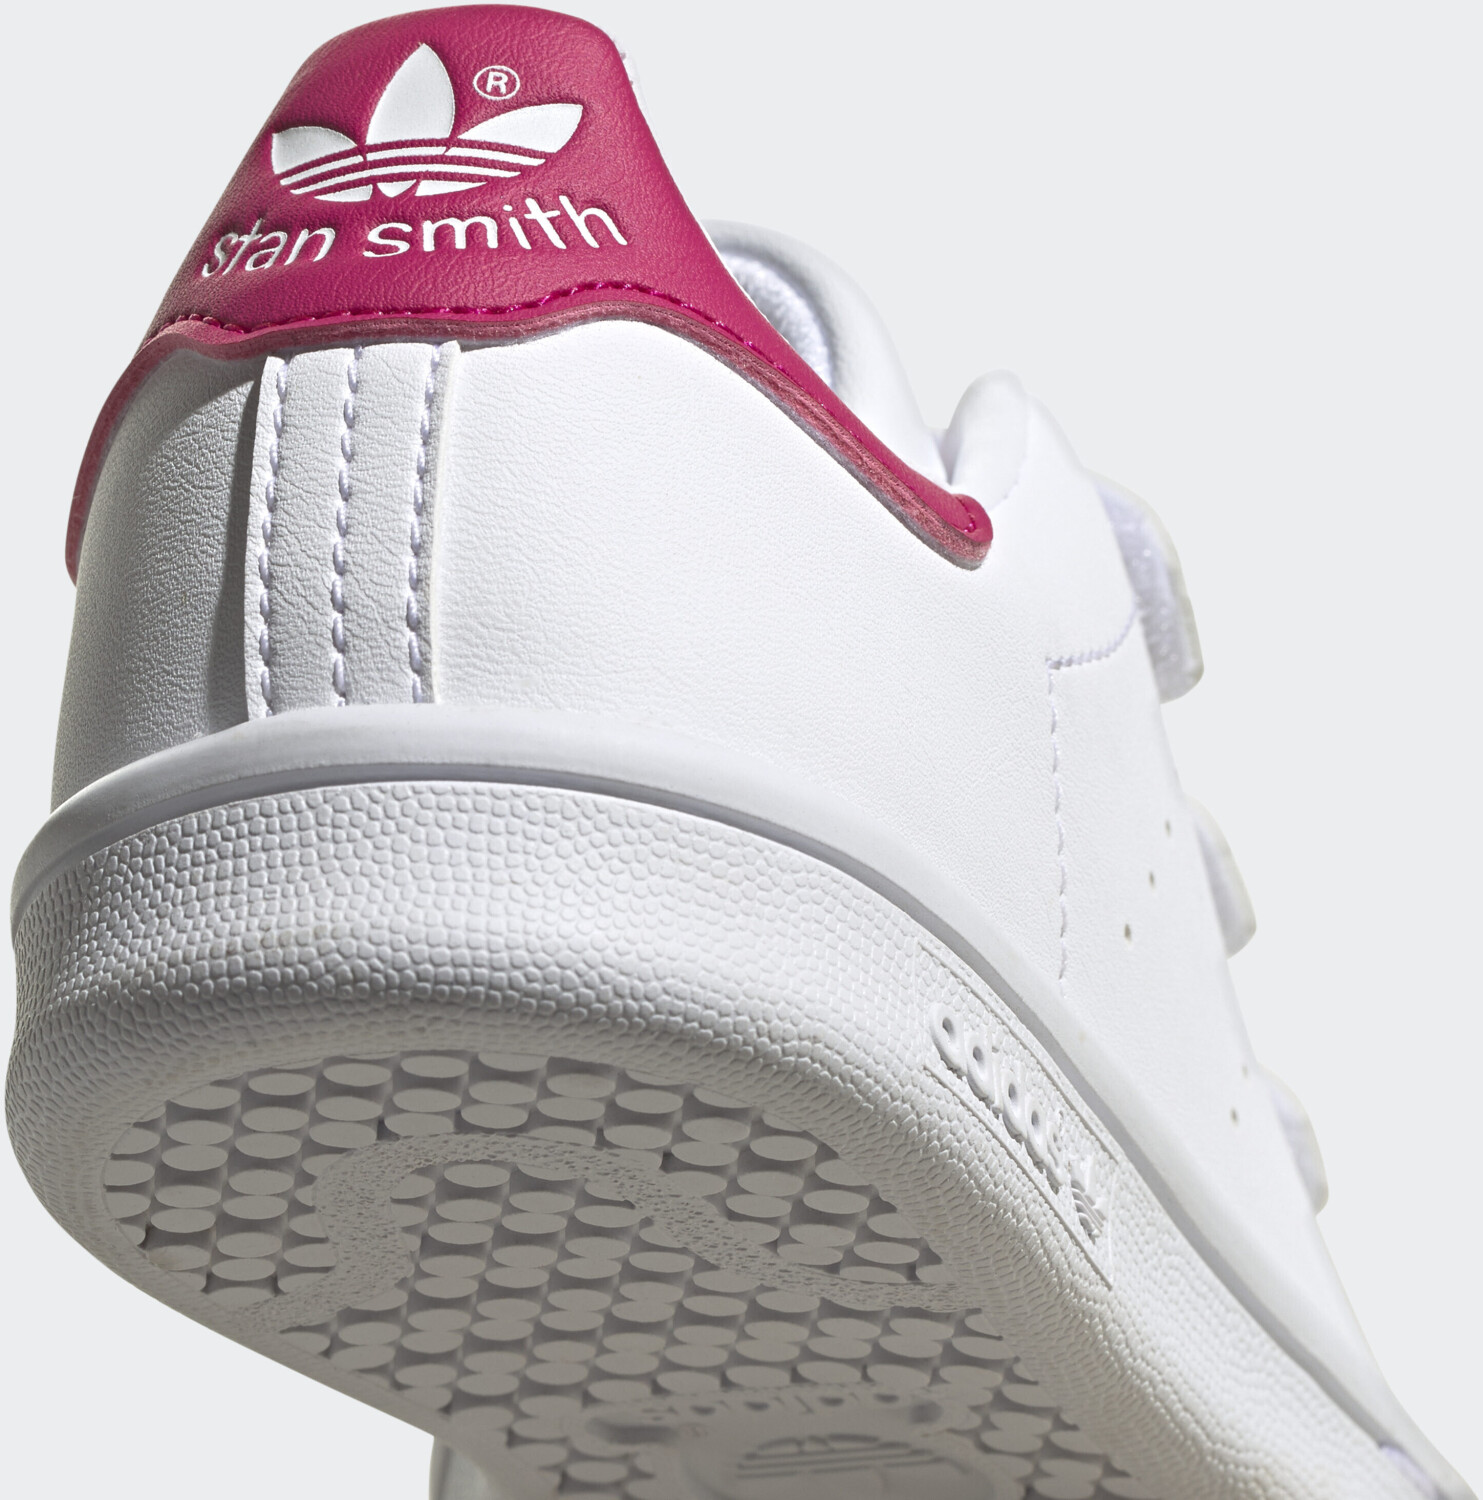 Buy Adidas White/Cloud Stan on Smith Kinder from White/Bold Deals (Today) Cloud Pink £32.50 Best –